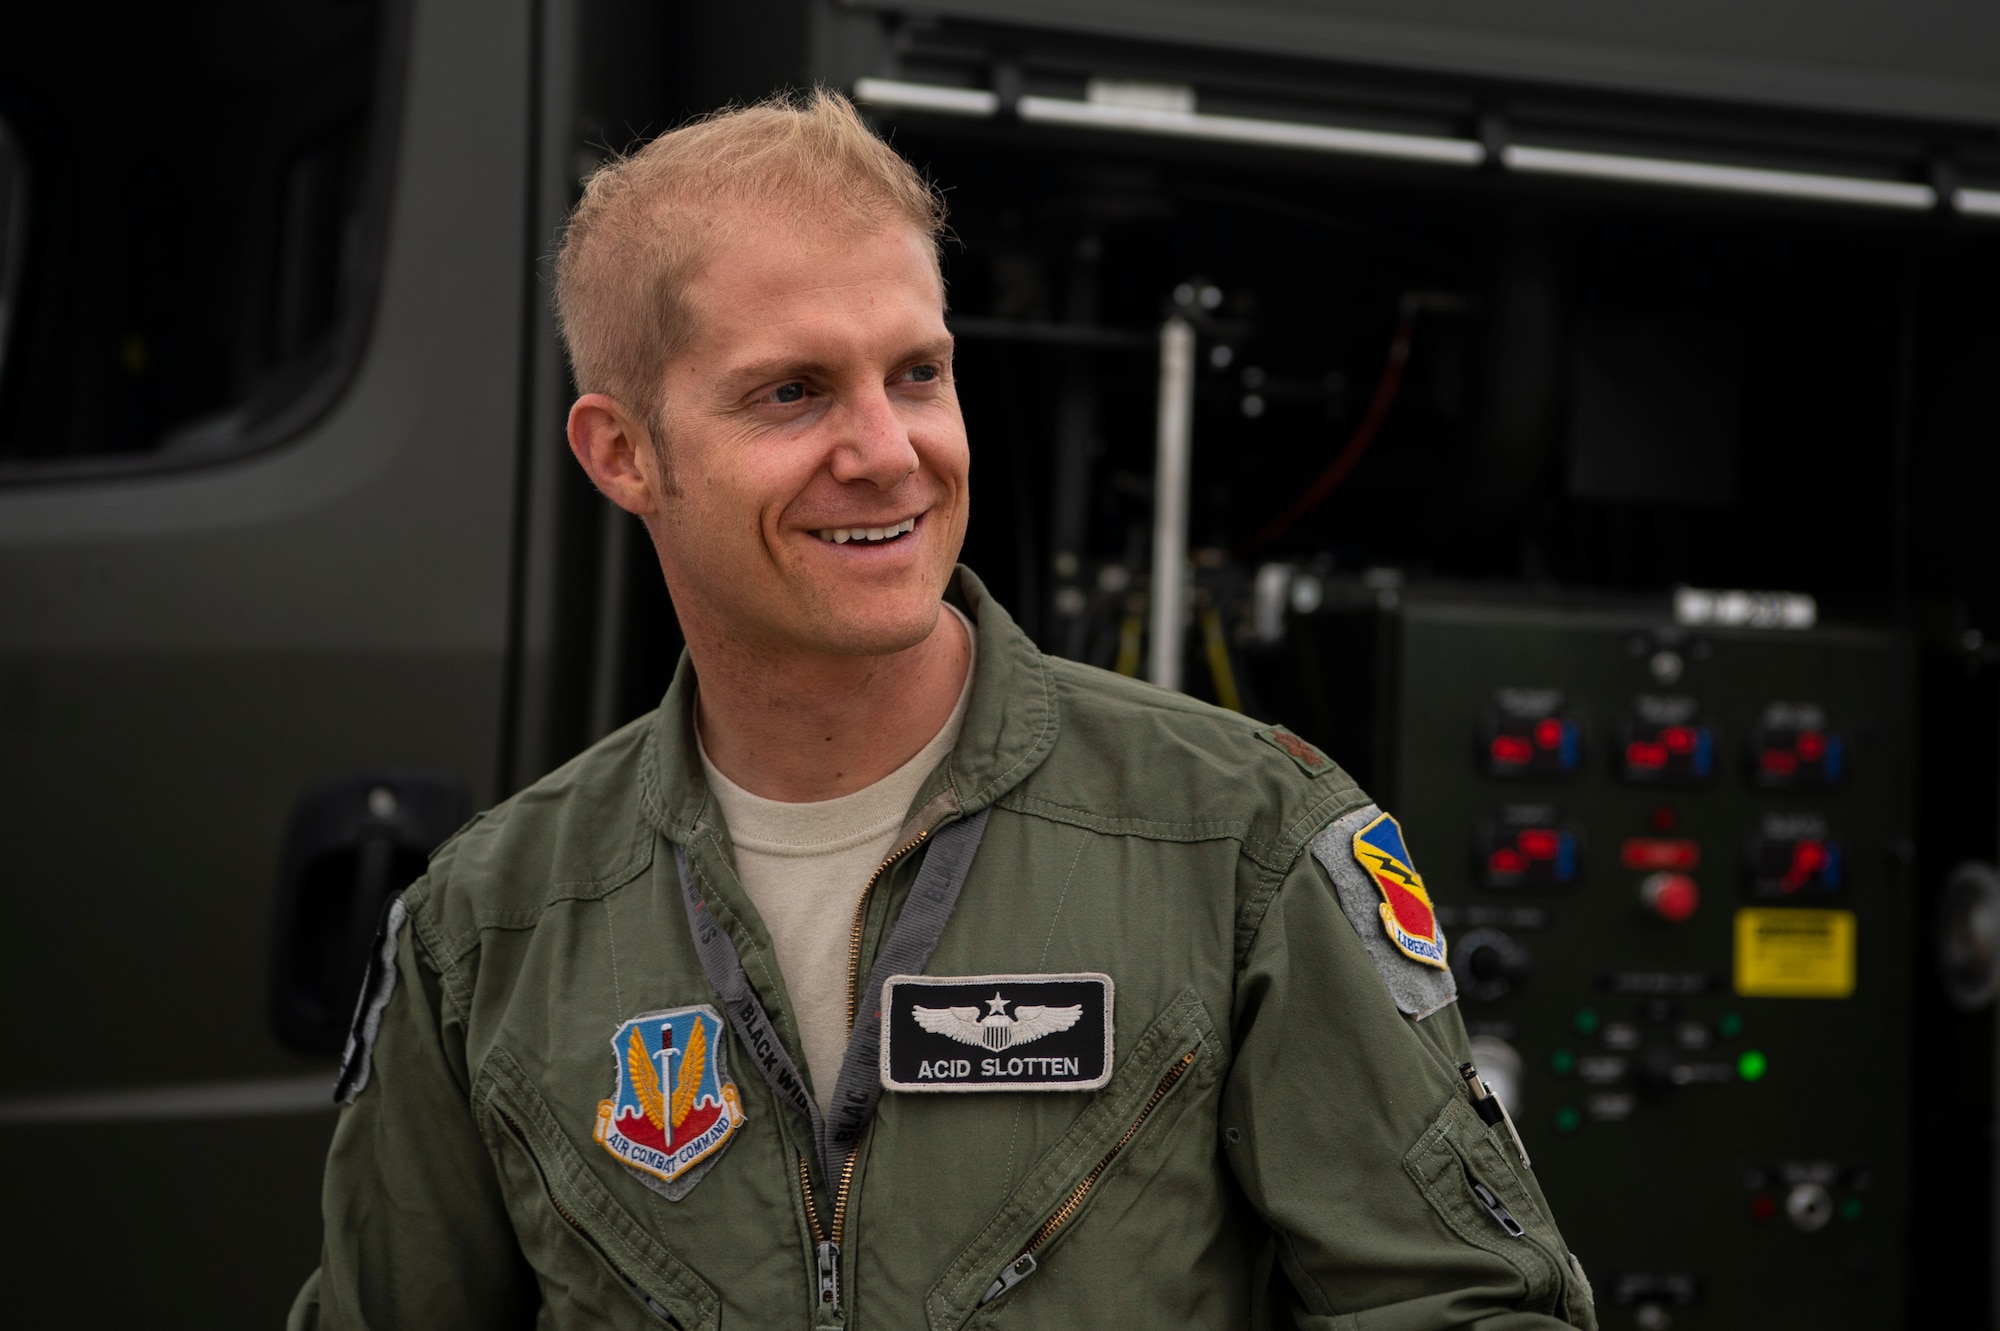 U.S. Air Force Maj. Michael Slotten, 421st Fighter Squadron F-35A Lightning II pilot, prepares to refuel an F-35A at Spangdahlem Air Base, Germany, July 11, 2019. Slotten was stationed at Spangdahlem from 2004 to 2006 as an Airman first class fuels distributor operator. He visited his old unit and became requalified to refuel aircraft while deployed at Spangdahlem as part of a Theater Security Package. (U.S. Air Force photo by Airman 1st Class Valerie Seelye)